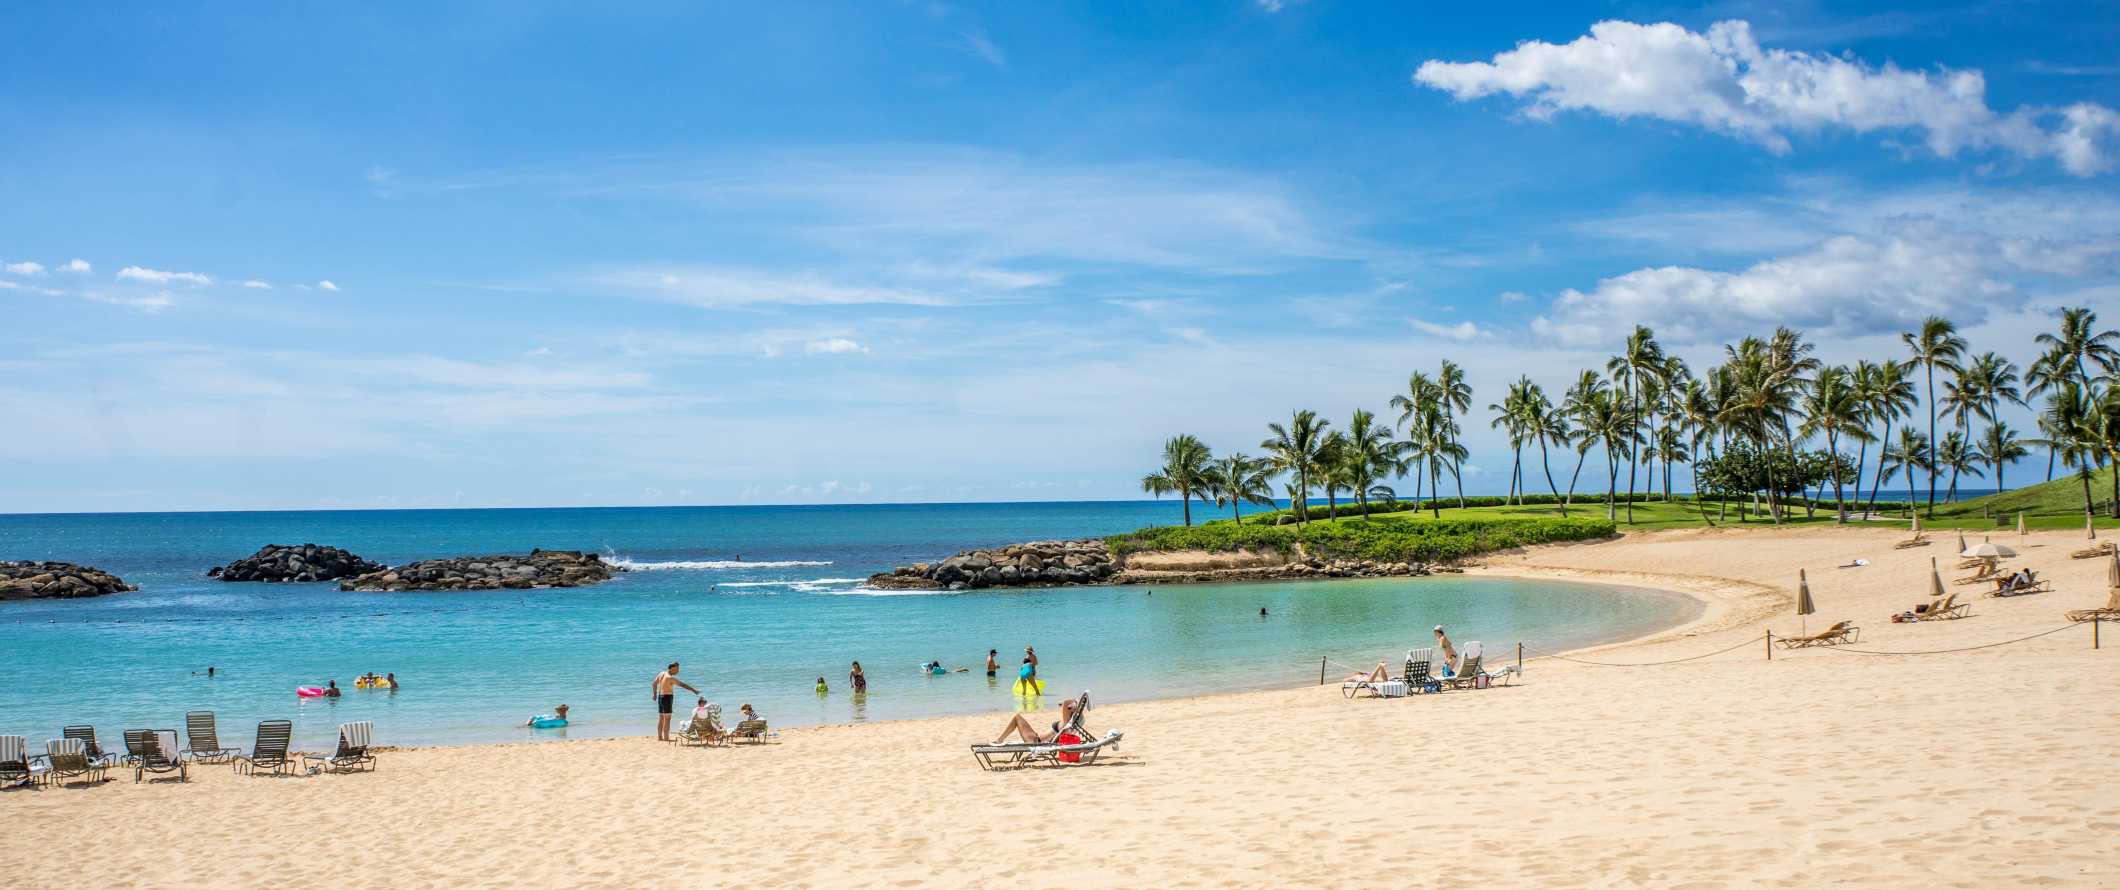 People lounging on the beach with palm trees in the background in Hawaii.